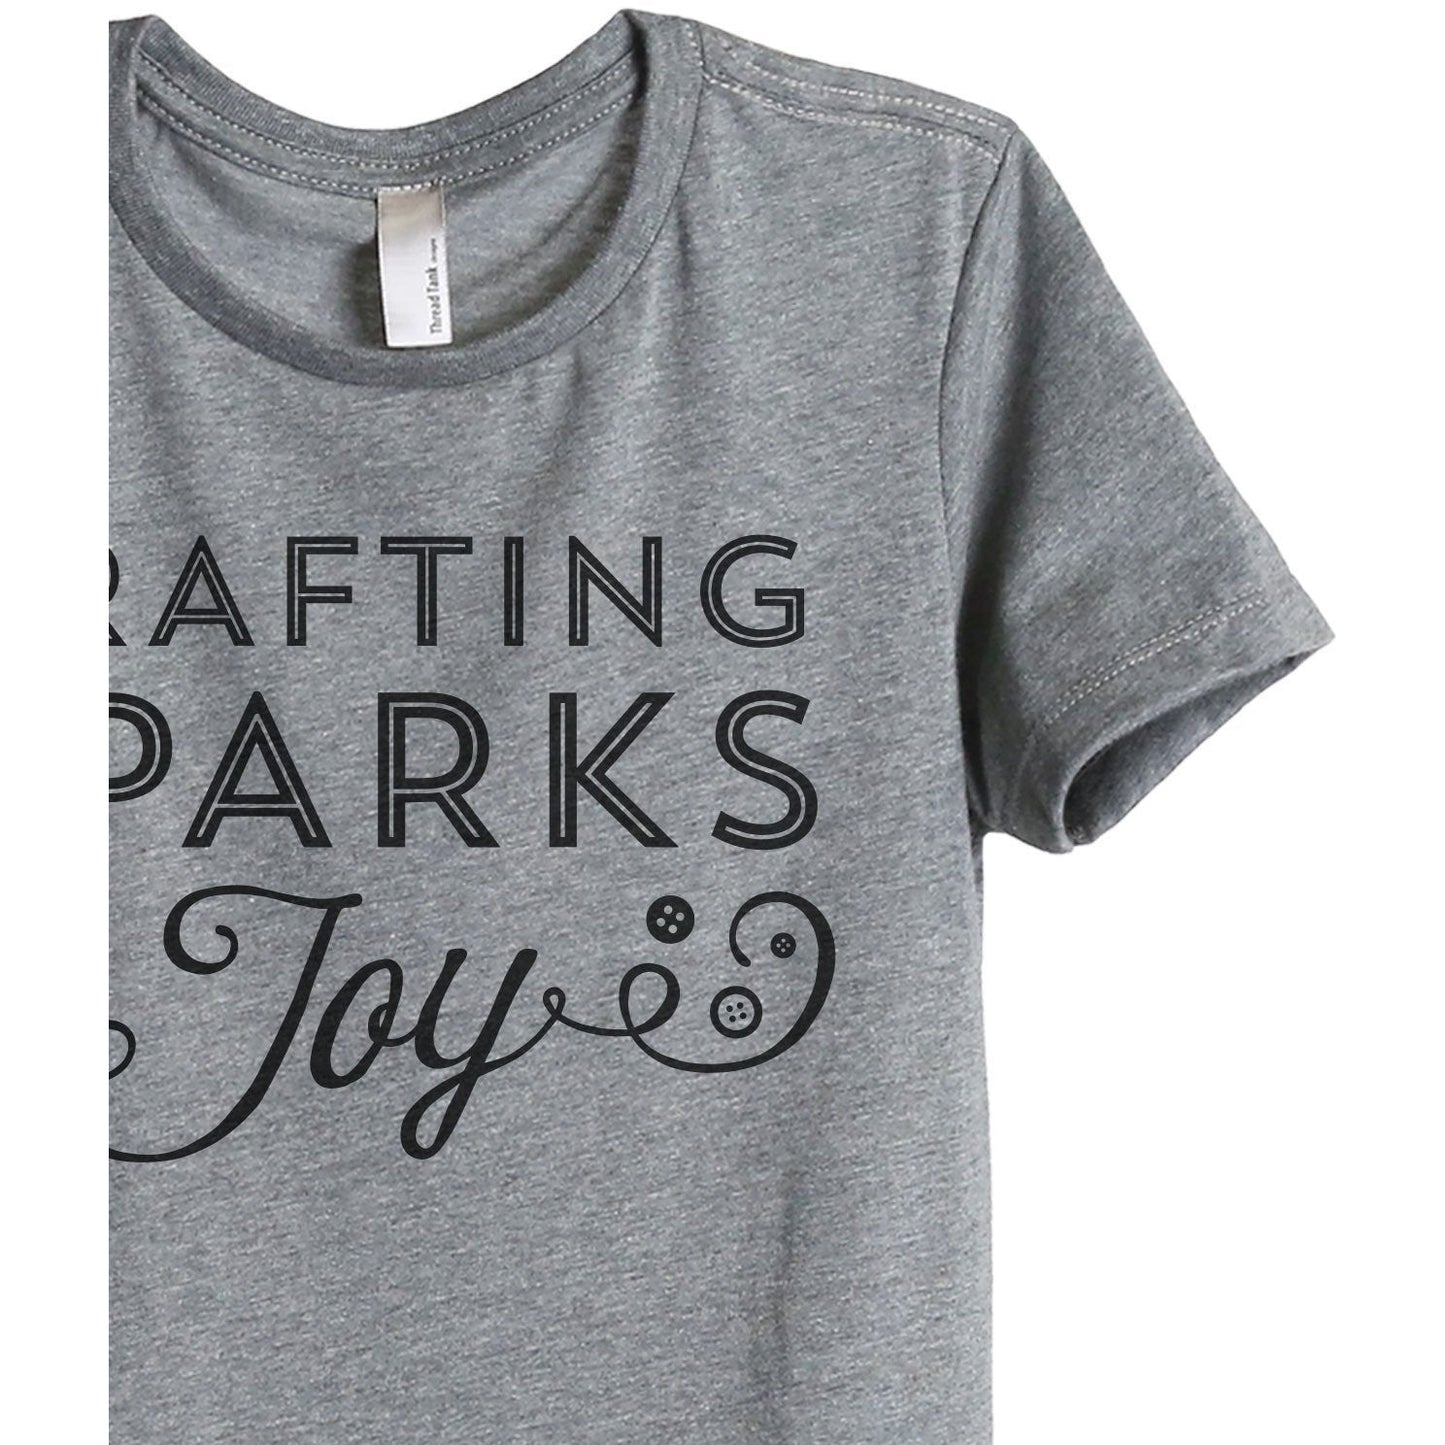 Crafting Sparks Joy Women's Relaxed Crewneck T-Shirt Top Tee Heather Grey Zoom Details
